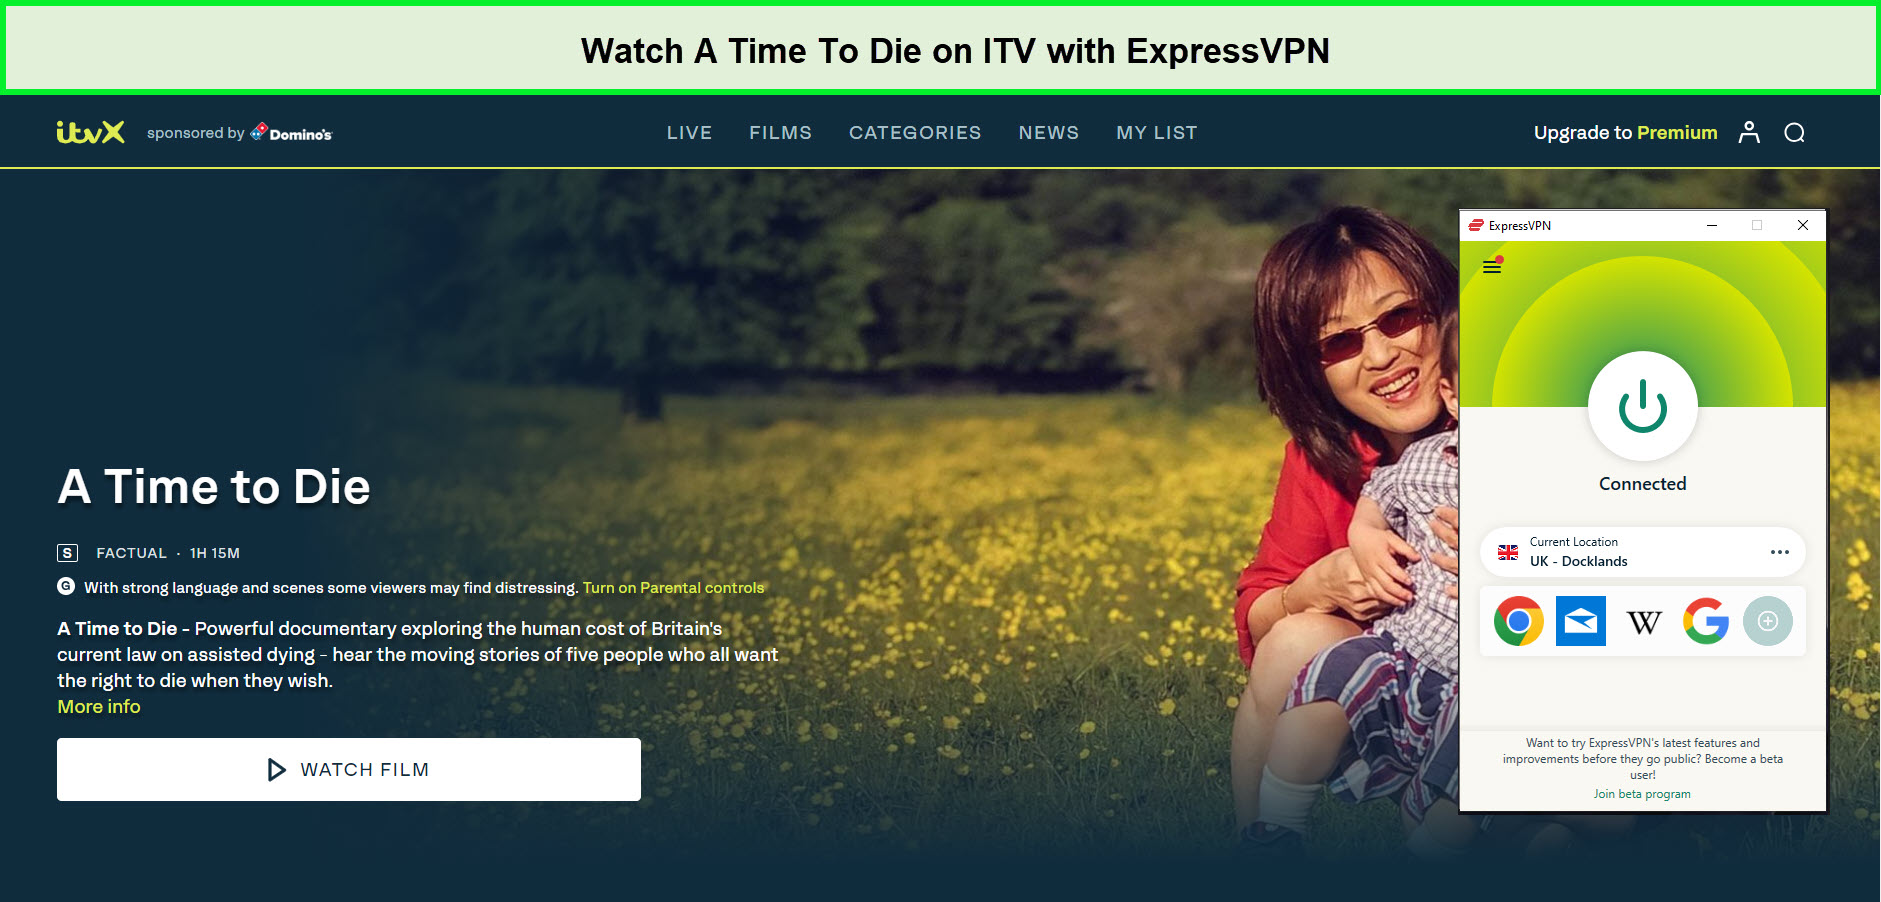 Watch-A-Time-To-Die-in-Australia-on-ITV-with-ExpressVPN